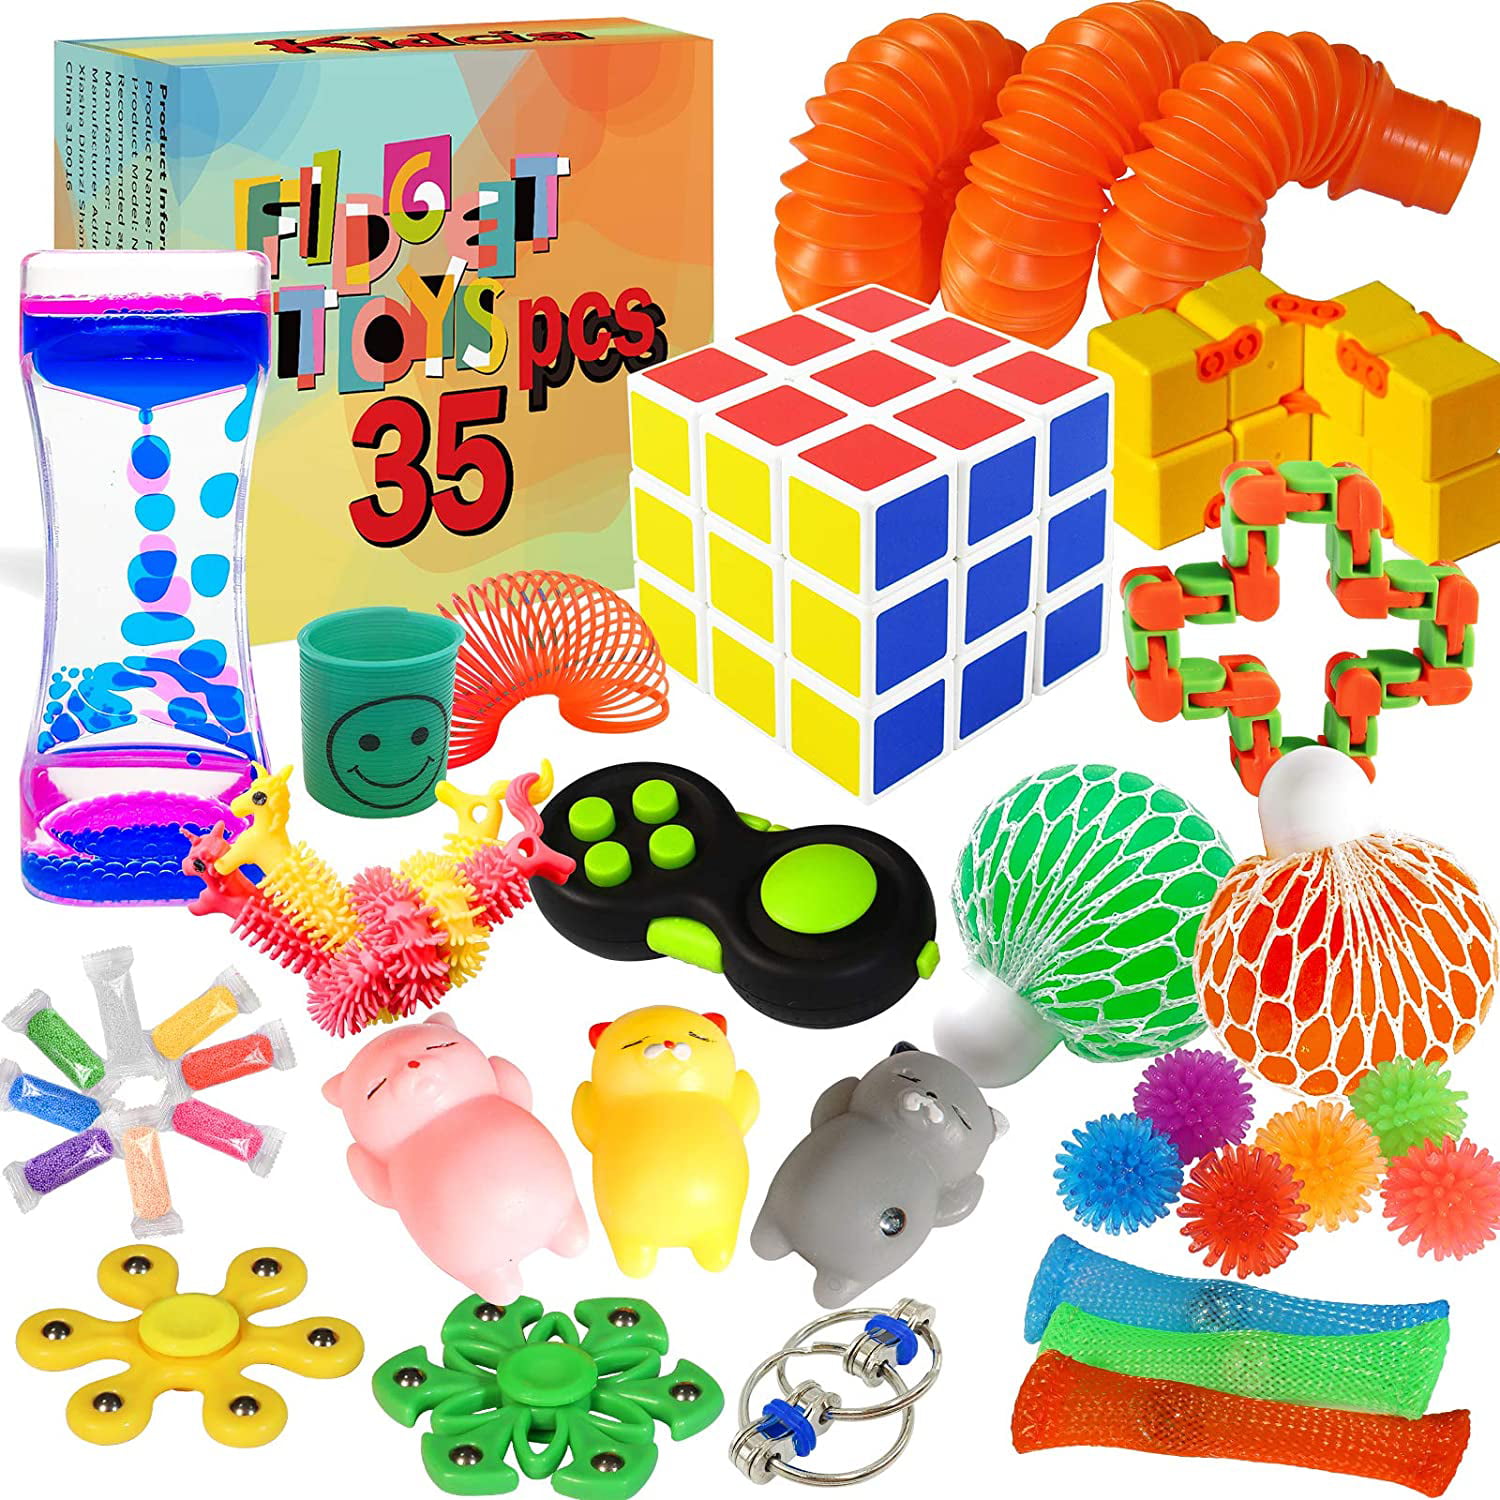 34 Pcs Sensory Fidget Toys Pack Classroom Rewards Kids Party Favors Stress Relief and Anti-Anxiety Toys for Kids Children Adults ADHD ADD Anxiety Autism Perfect for Childrens Day Gift 